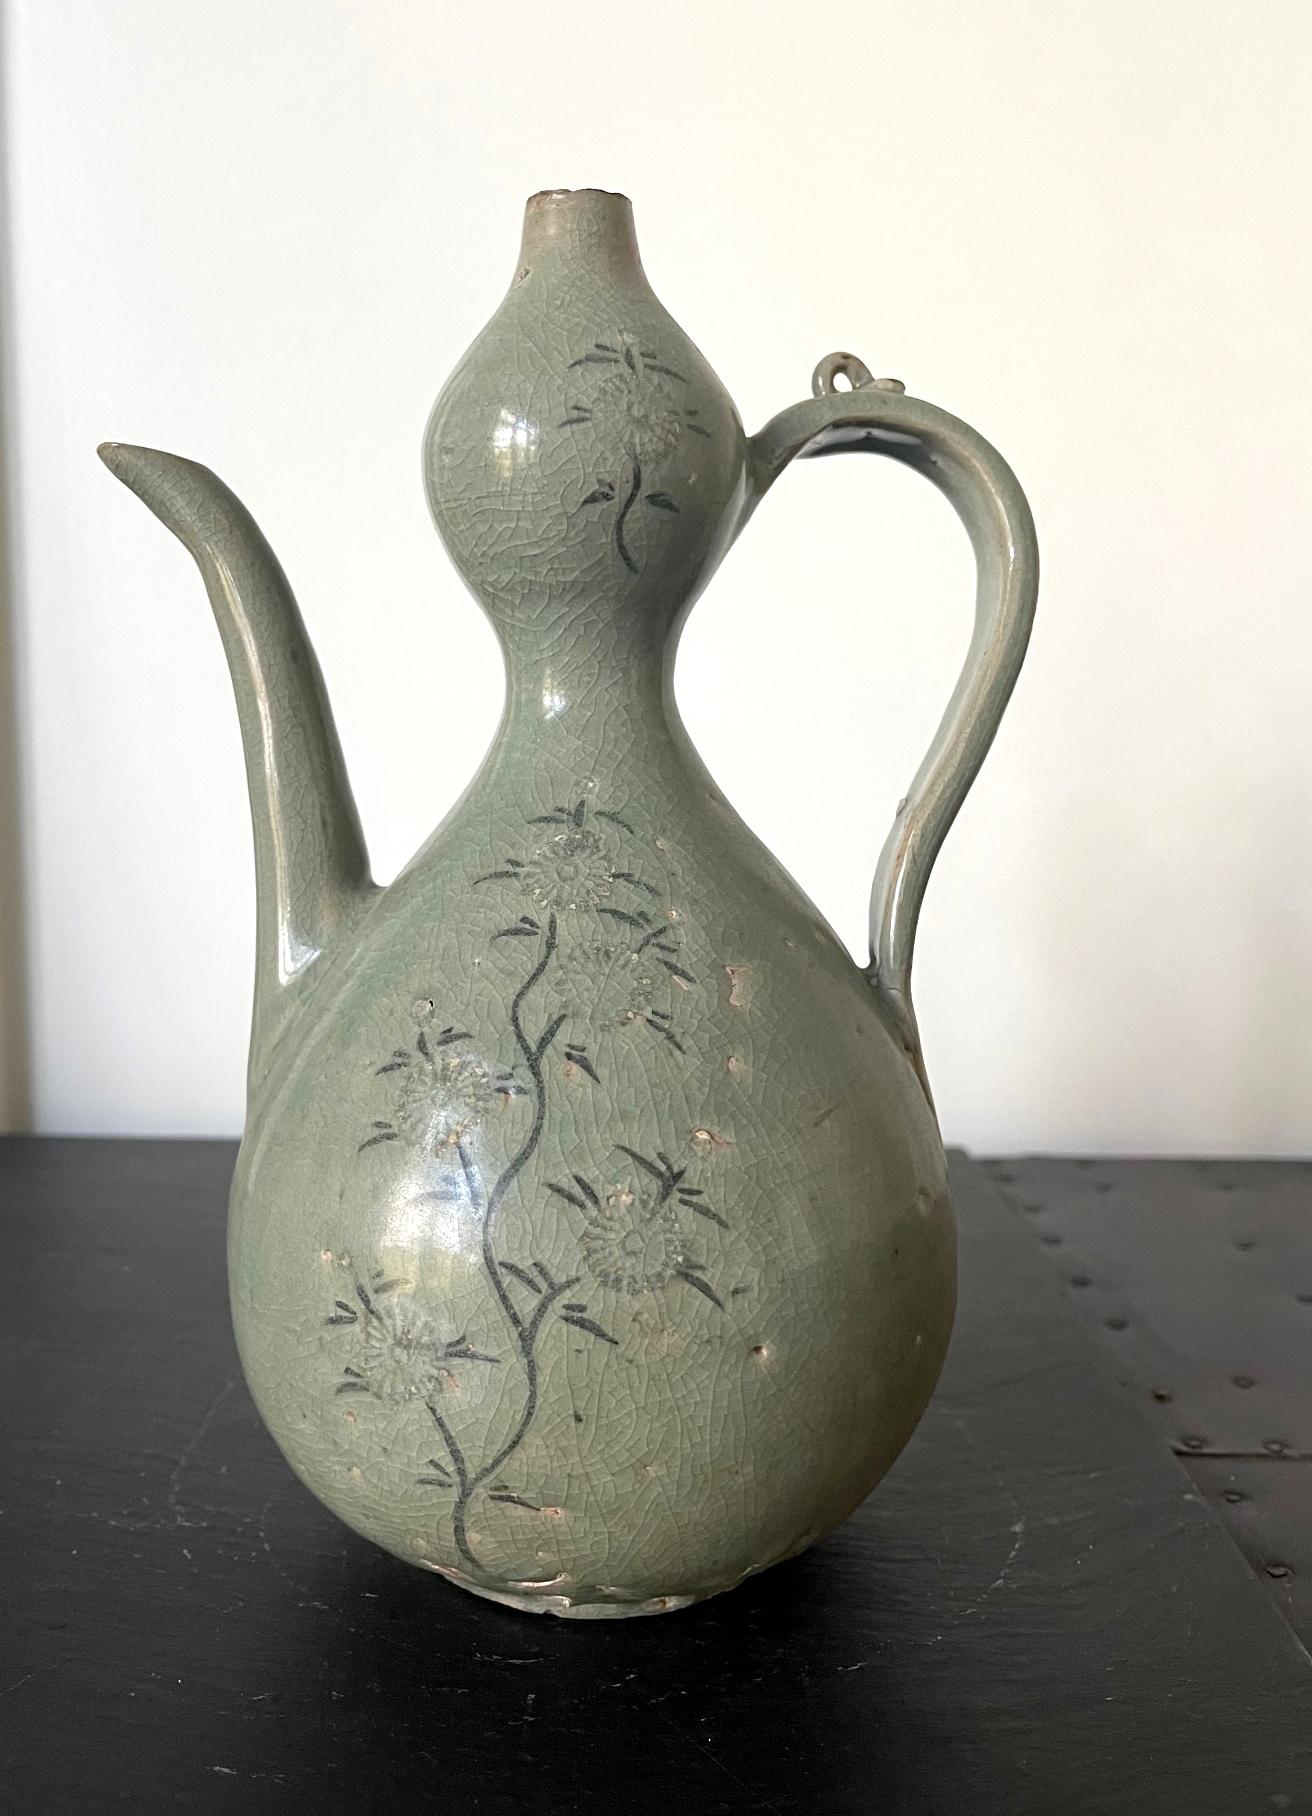 A Korean ceramic celadon ewer with black slip inlay design from Goryeo Dynasty (918 to 1392AD) circa 12-13th century. The vessel was used to contain and pour wine historically and it in a relatively rare form of 